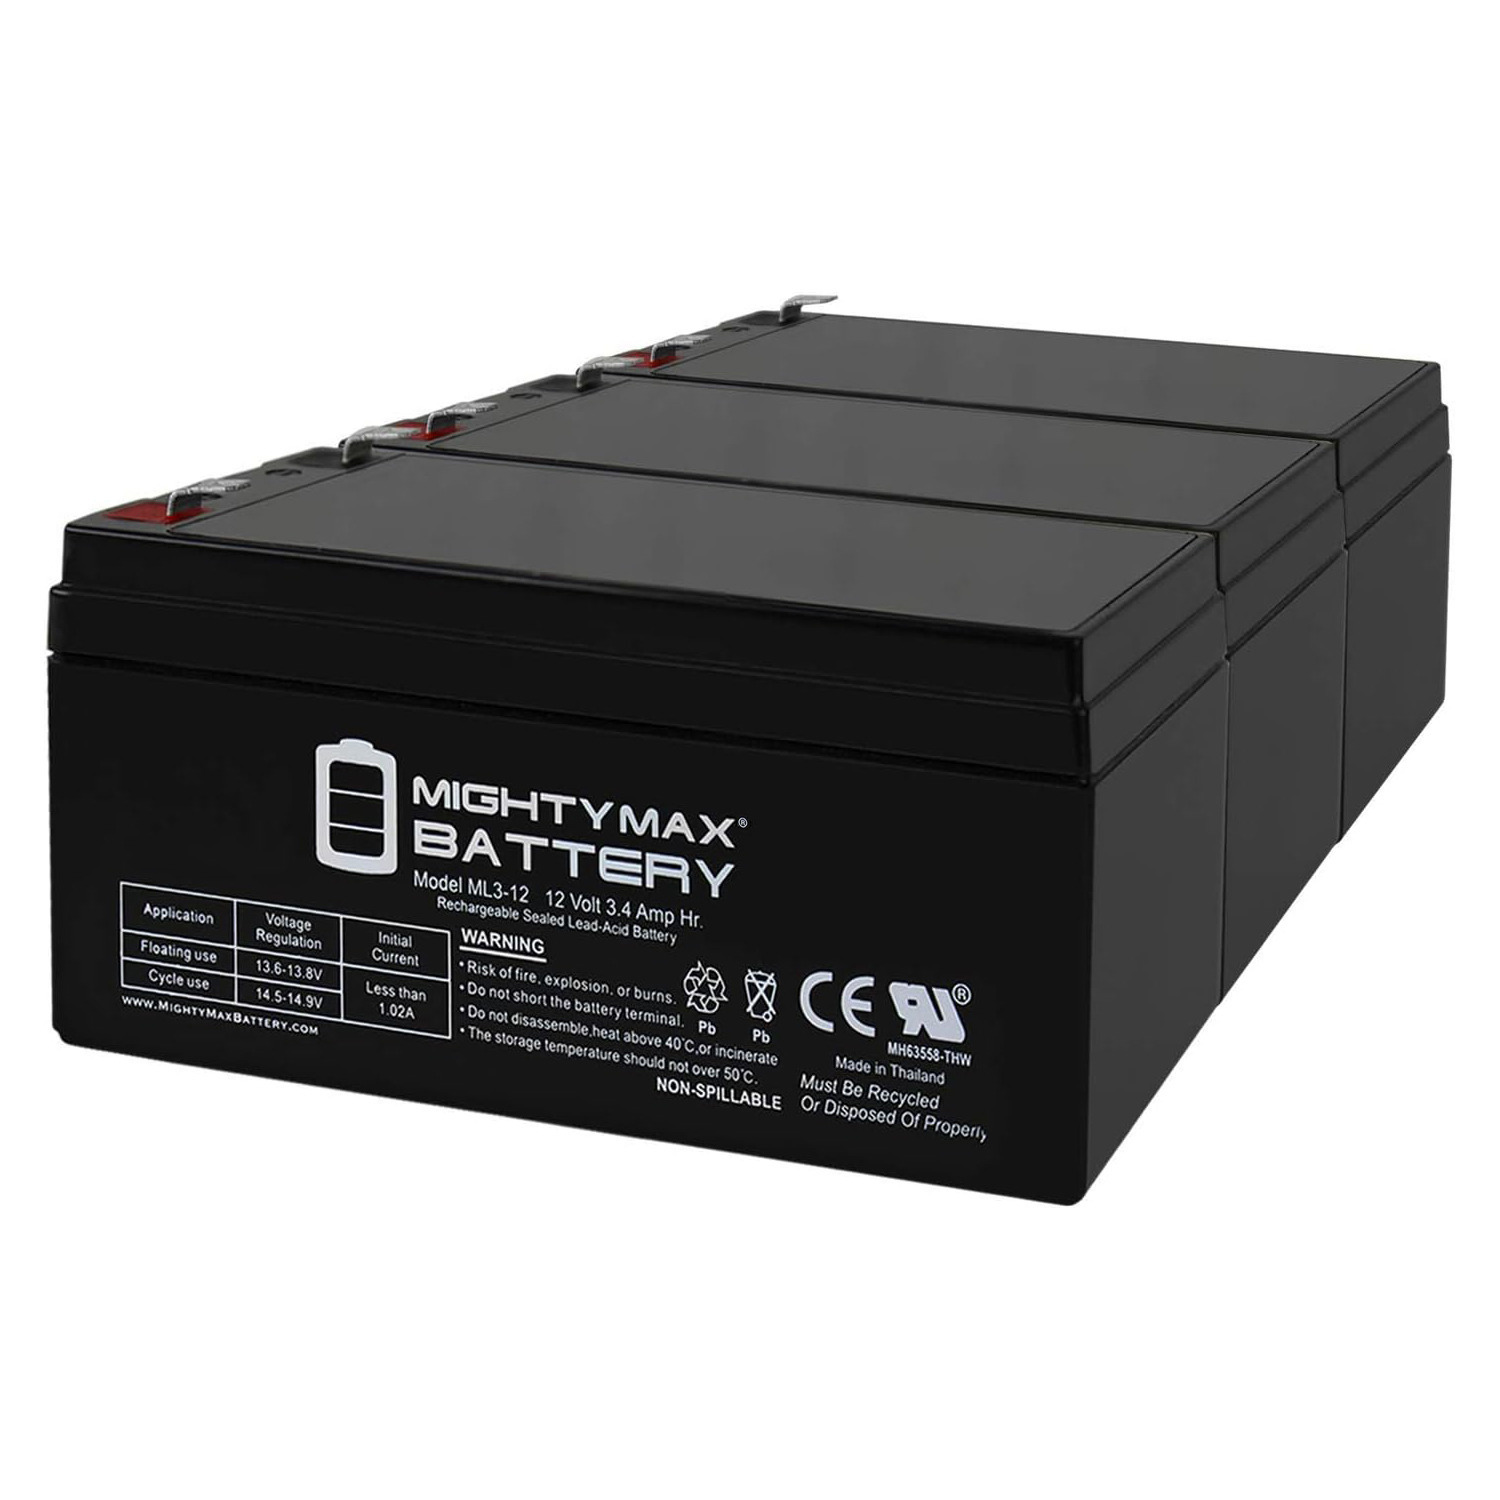 12V 3AH SLA Replacement Battery for GS Portalac PE12V3F1 - 3 Pack